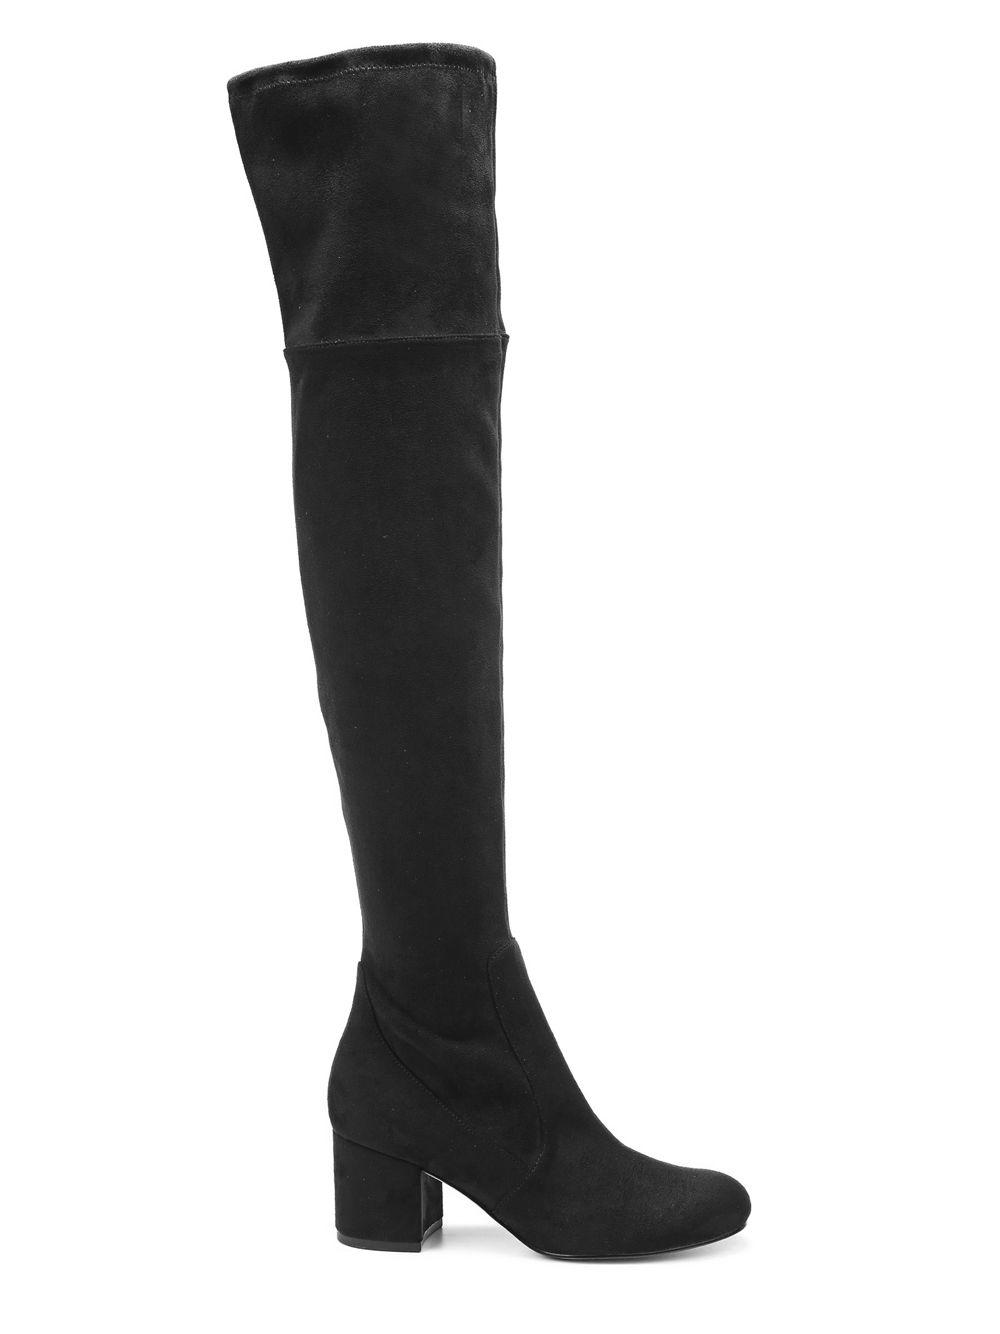 Sam Edelman Synthetic Varona Suede Knee-high Boots in Black - Lyst